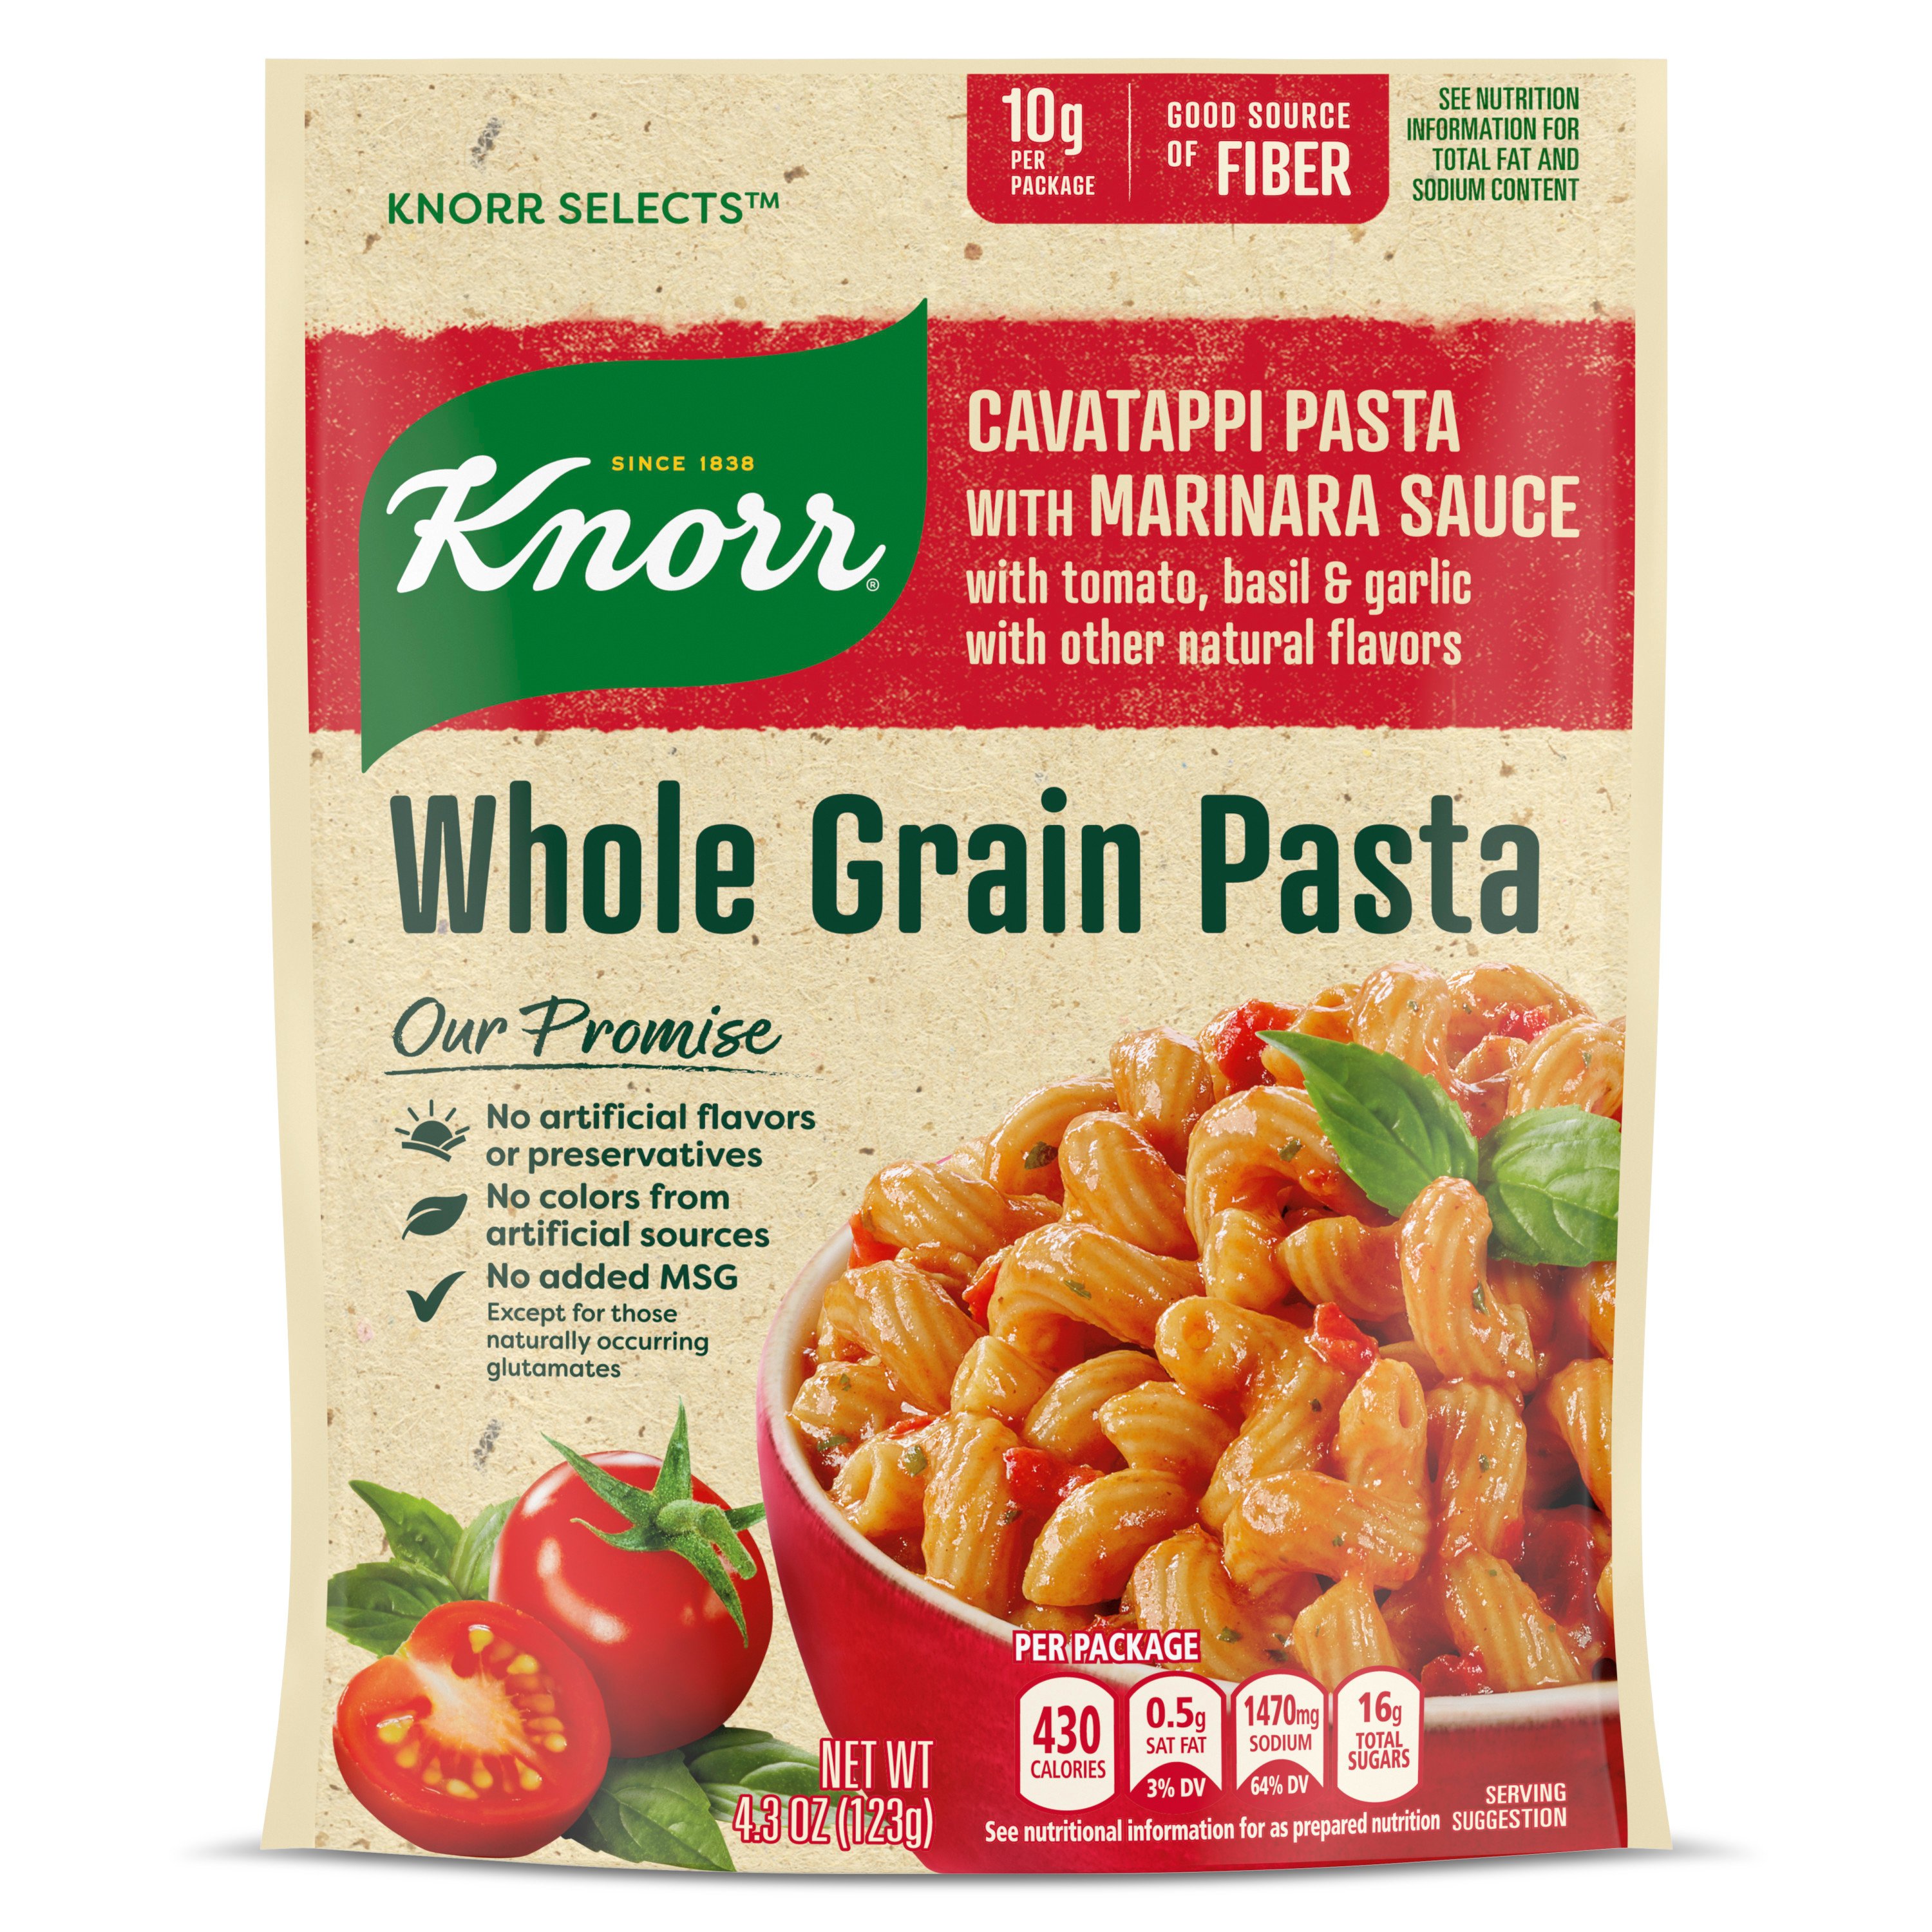 Download Knorr Selects Cavatappi With Marinara Sauce Whole Grain Pasta Shop Pantry Meals At H E B